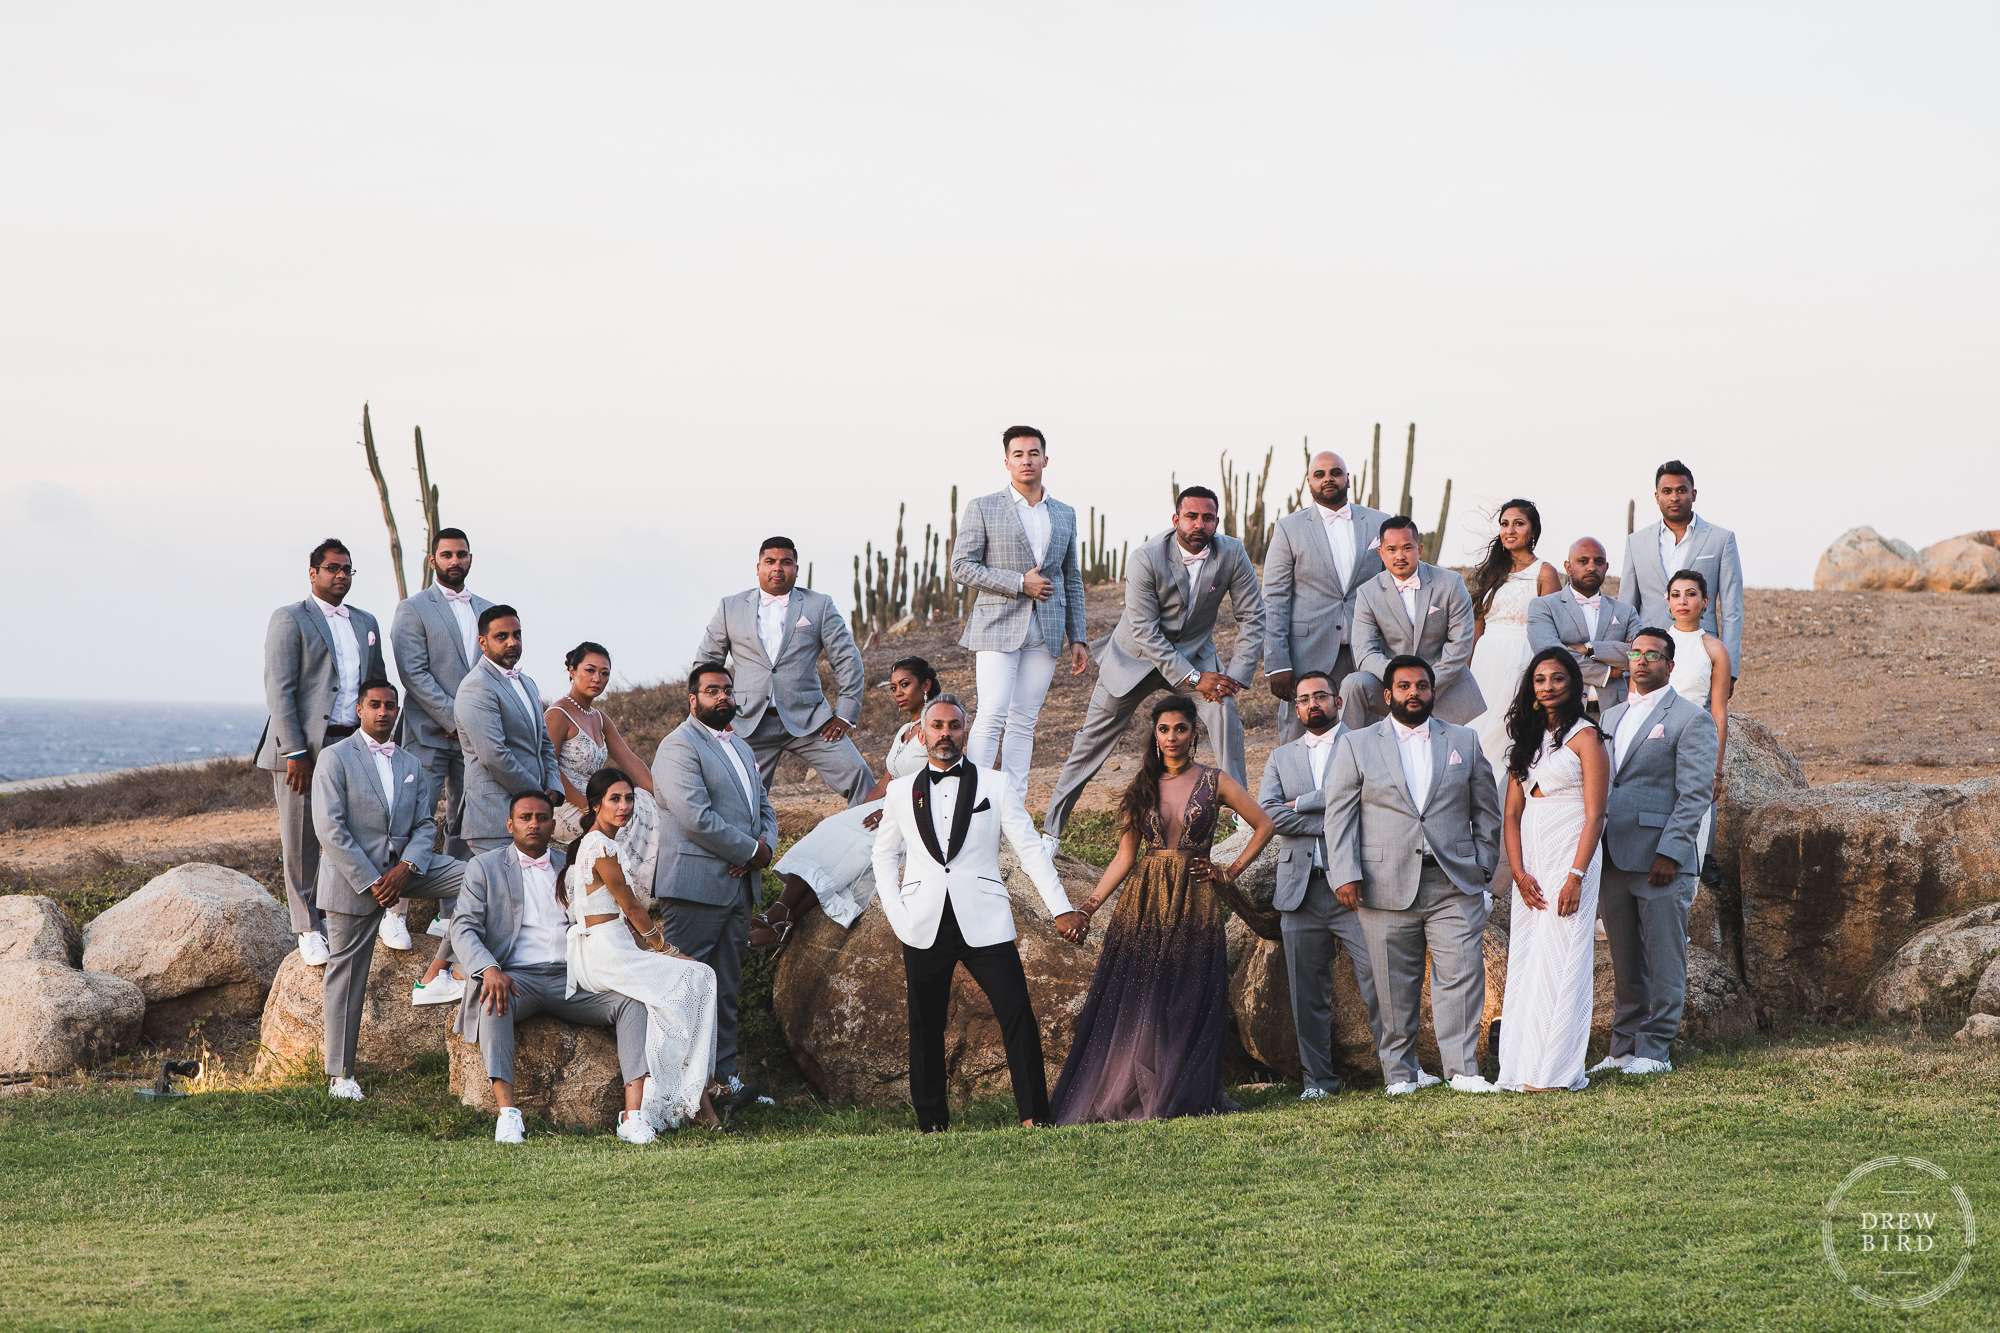 A classic and gorgeous wedding party portrait with over twenty bridesmaids and groomsmen and the Indian bride and groom. The wedding party are beautifully arranged sitting and standing on giant rock boulders at sunset at Tierra del Sol on the north shore of Aruba in the Caribbean by Aruba destination wedding photographer Drew Bird.